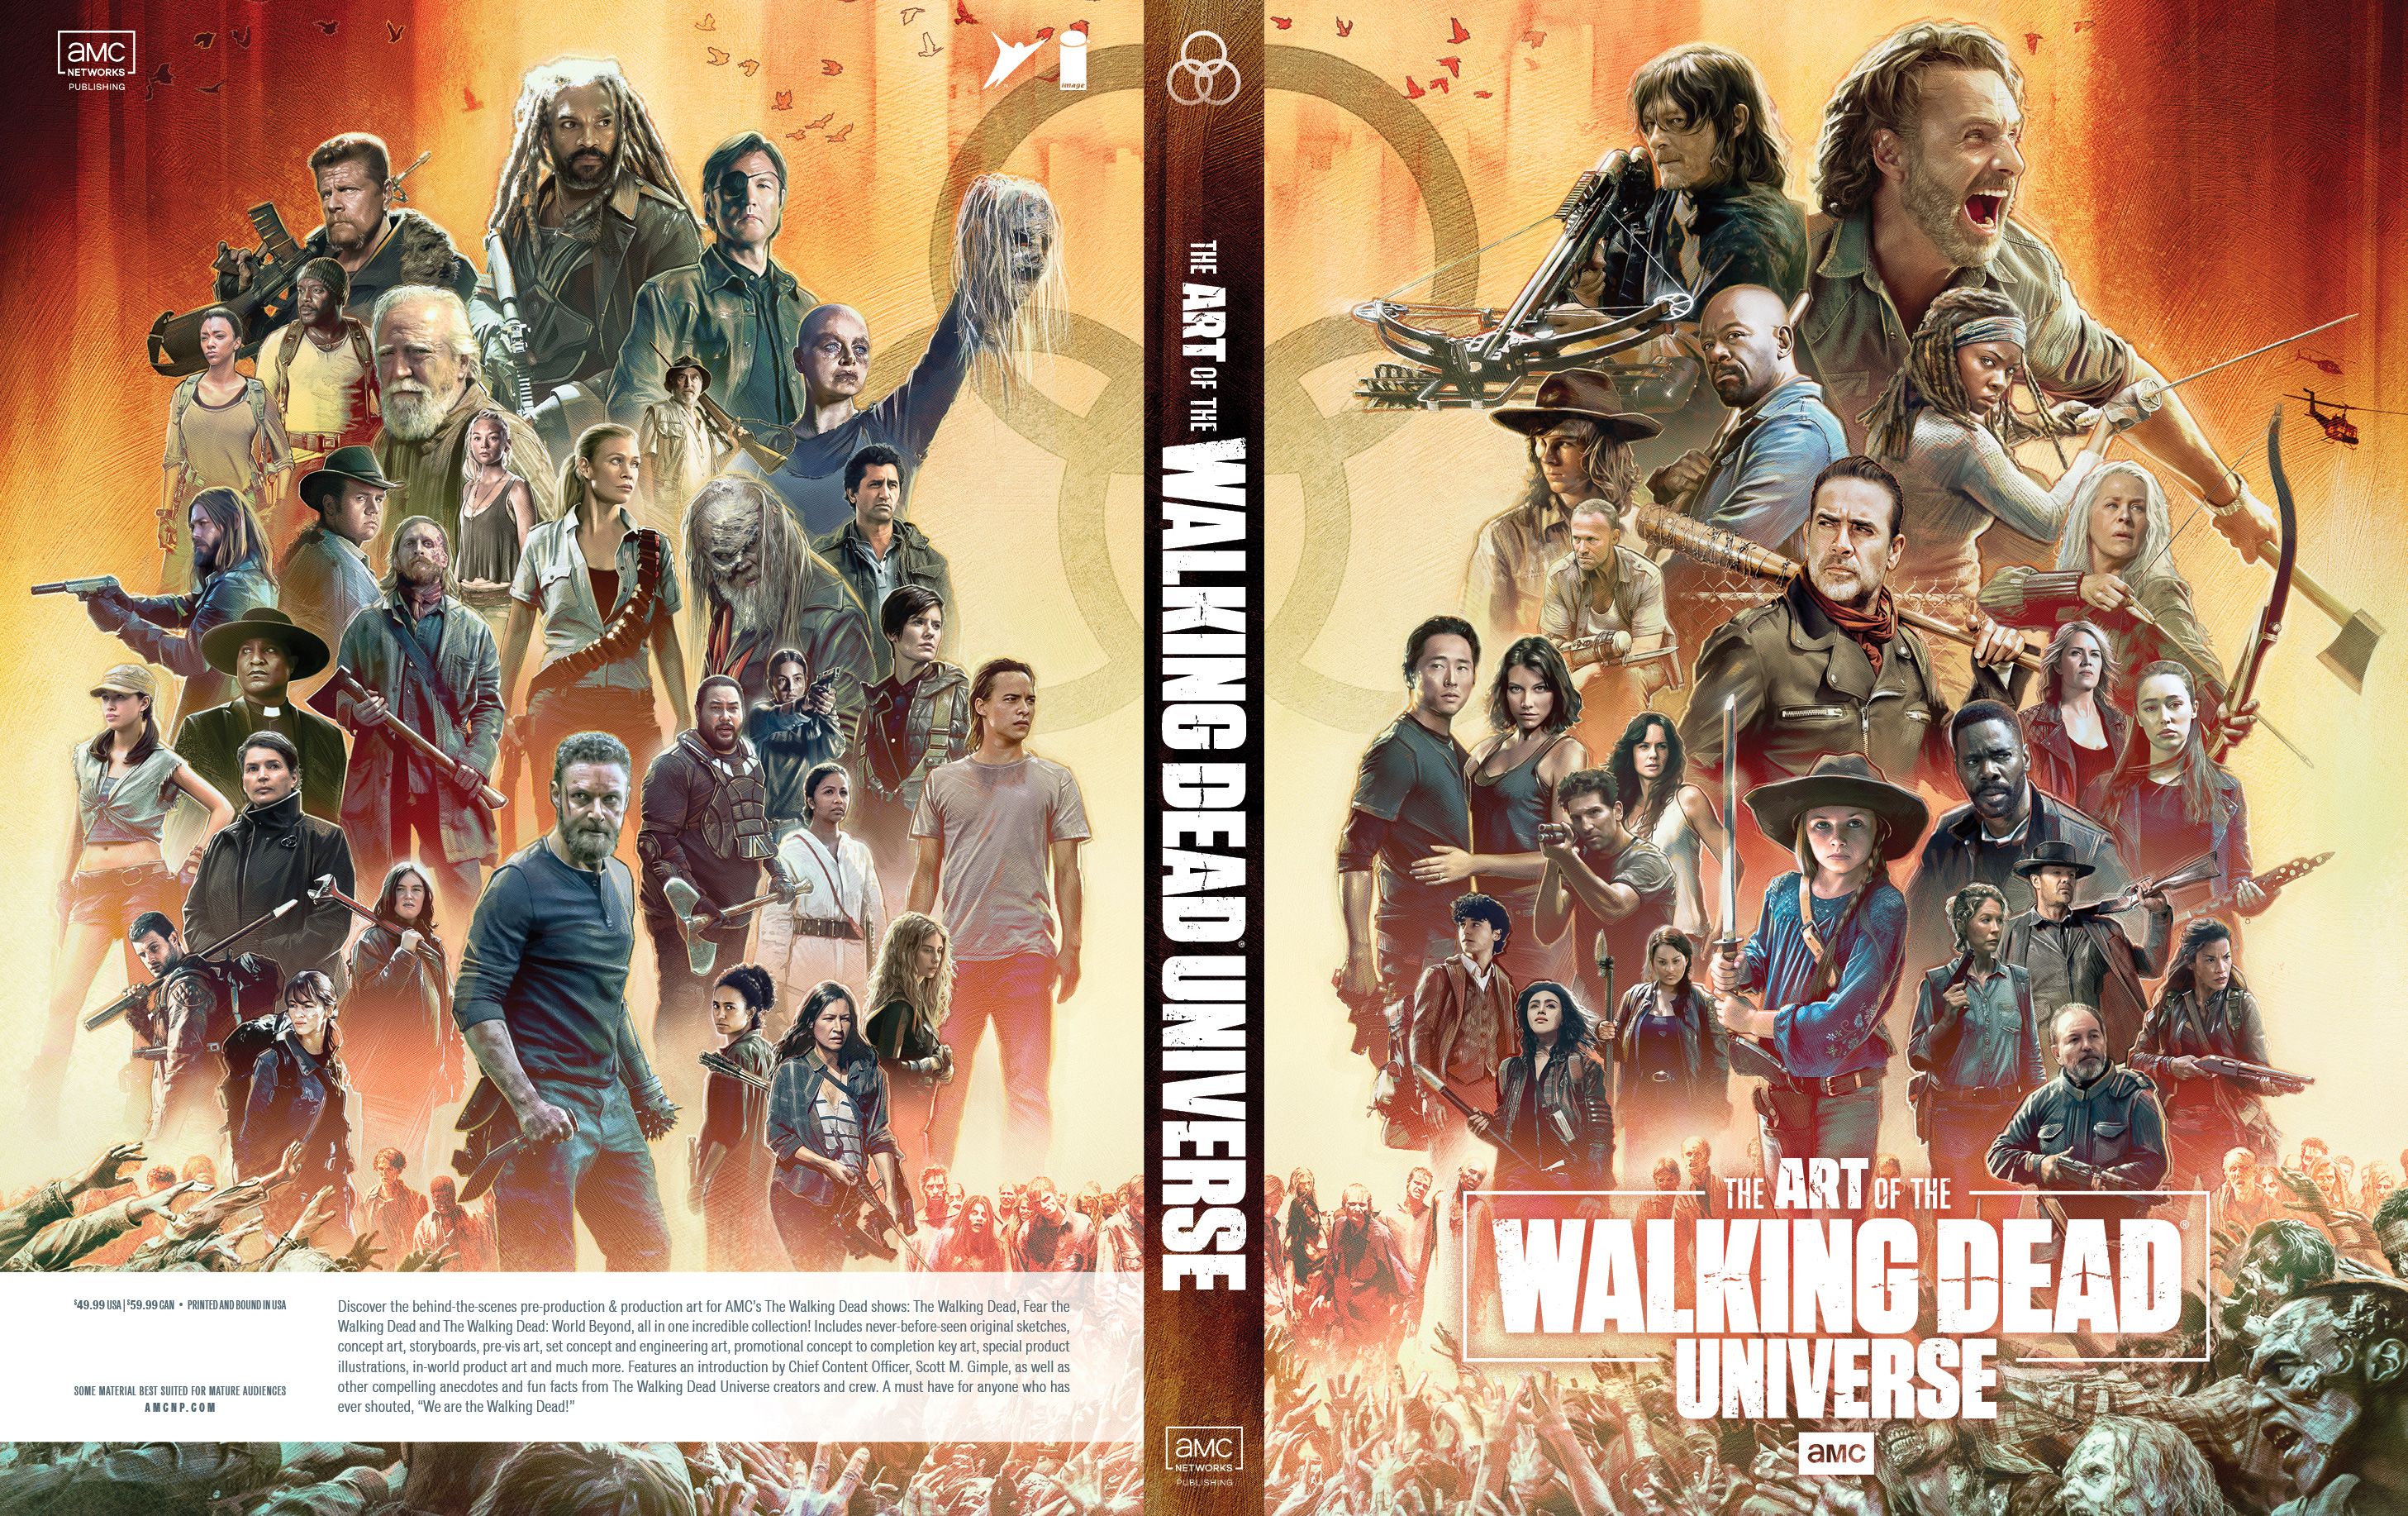 The Art of AMC’s The Walking Dead Universe book cover art